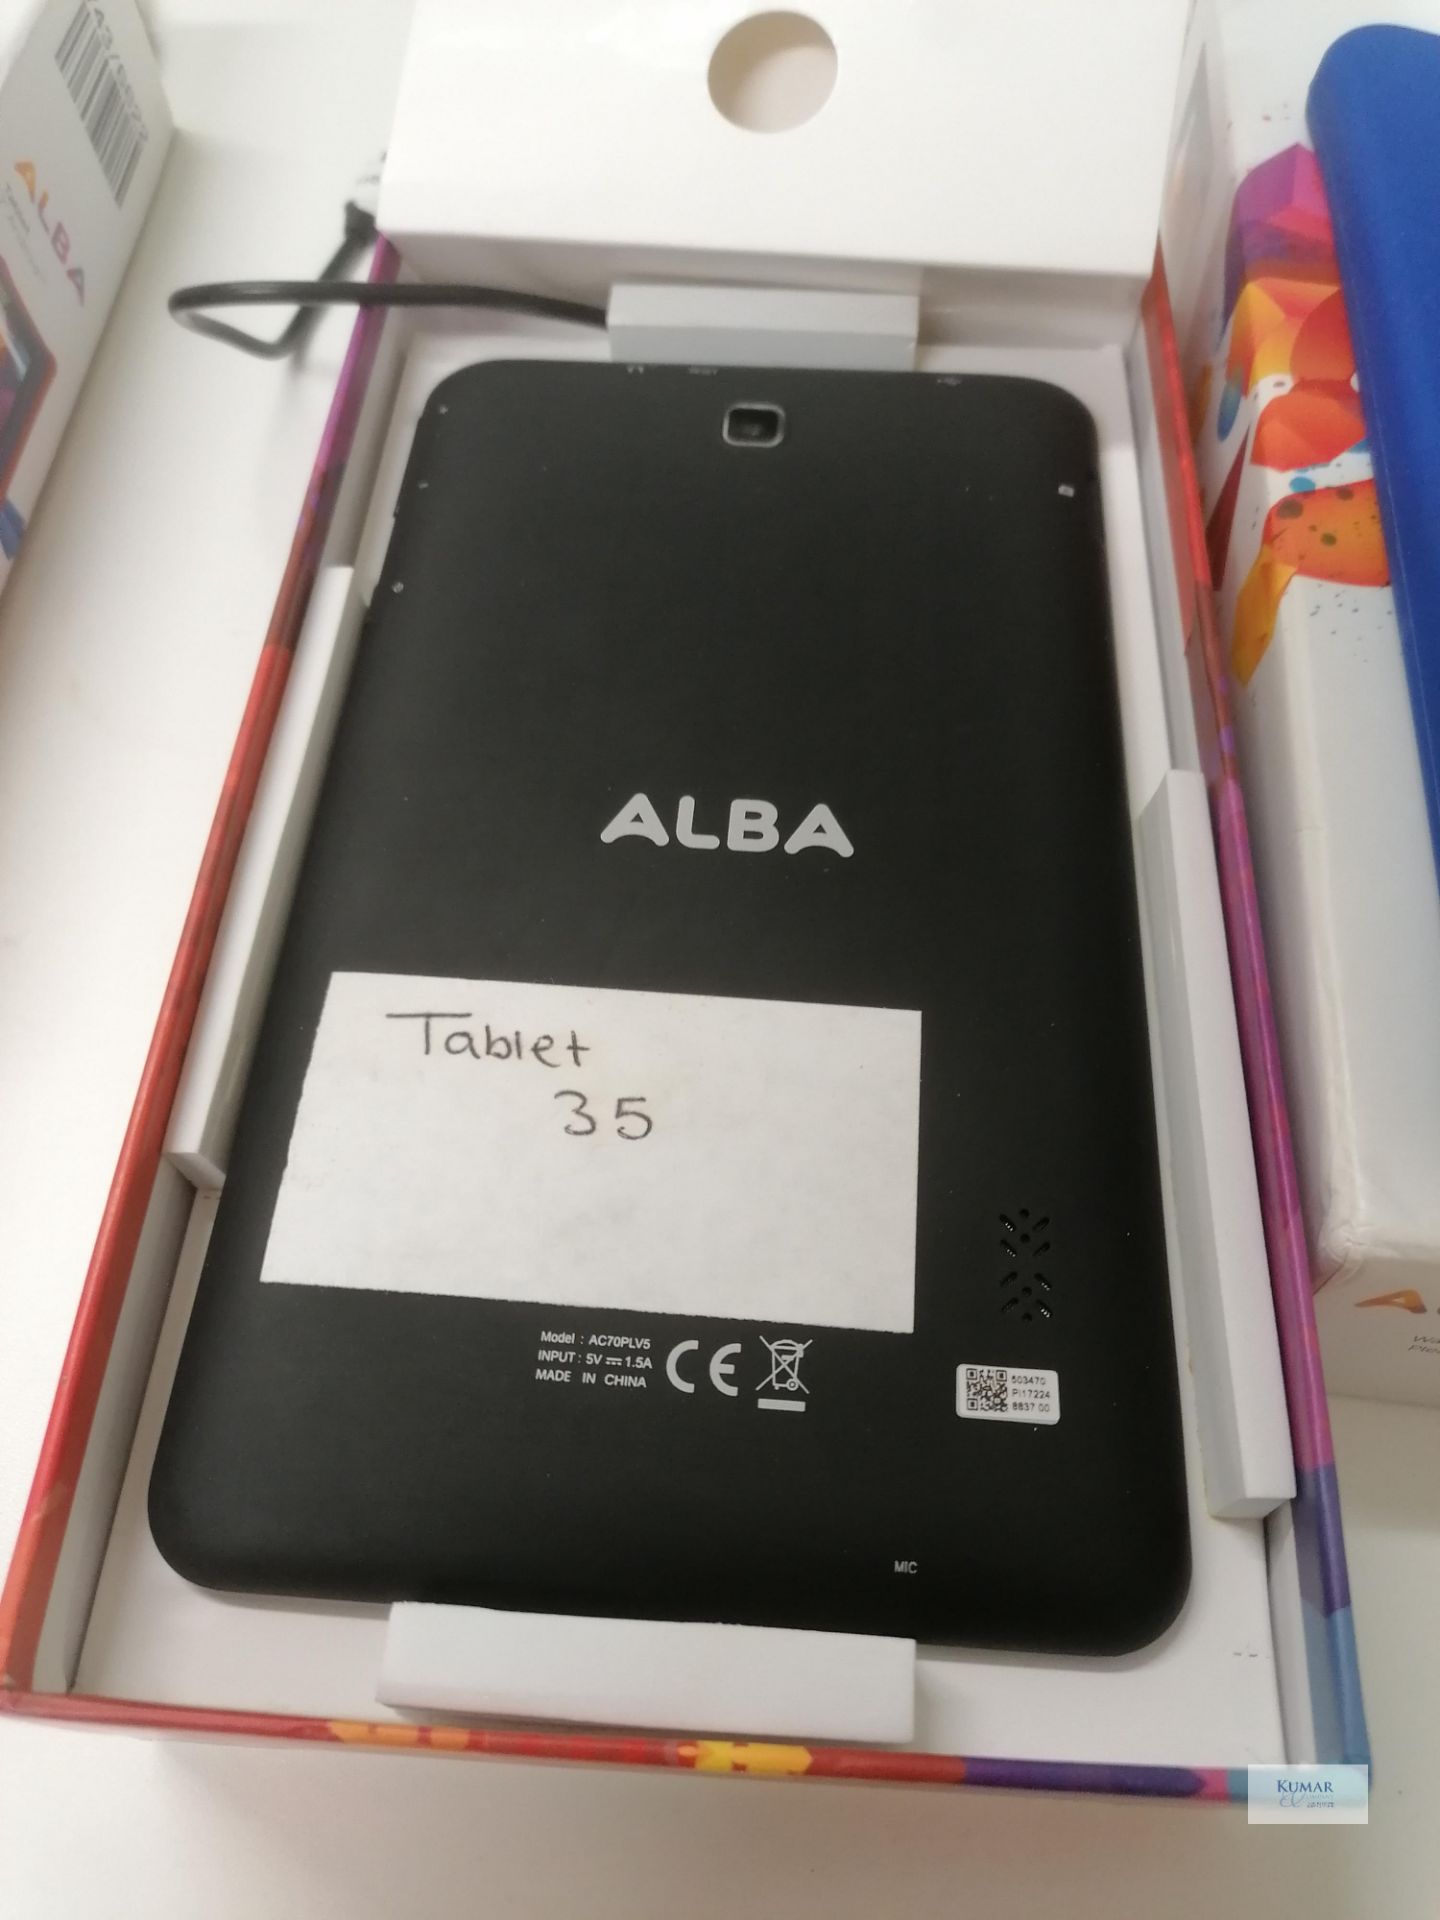 Alba Model AC07PLVS 7" Tablet with protective case,cable and charger Boxed - Image 5 of 6